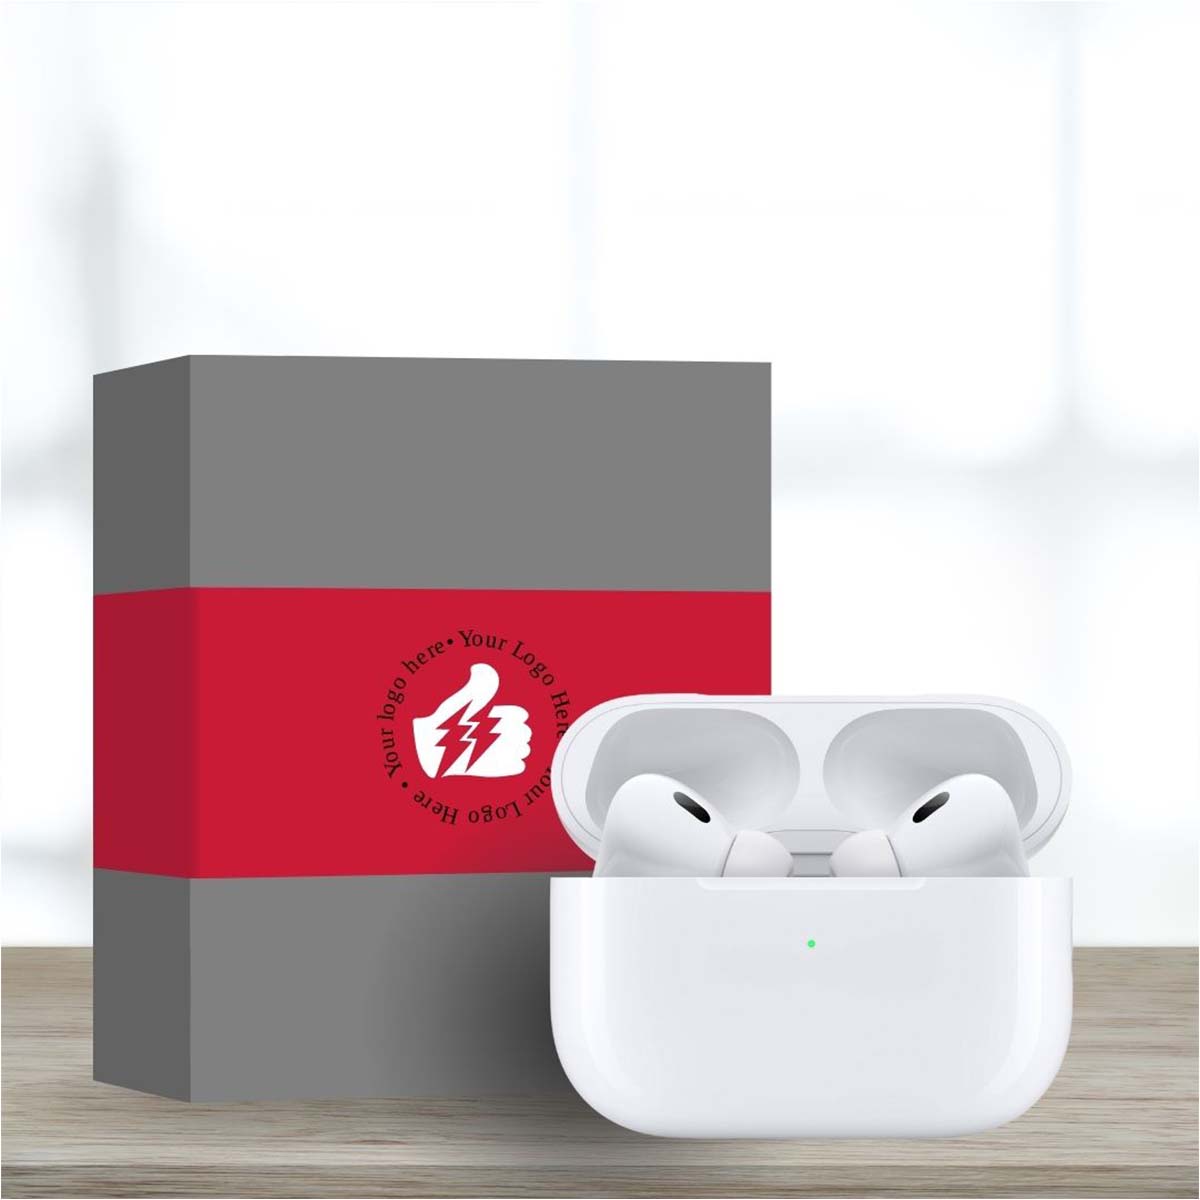 
                  
                    Apple AirPods Pro 2nd Generation w/ Active Noise Cancellation
                  
                